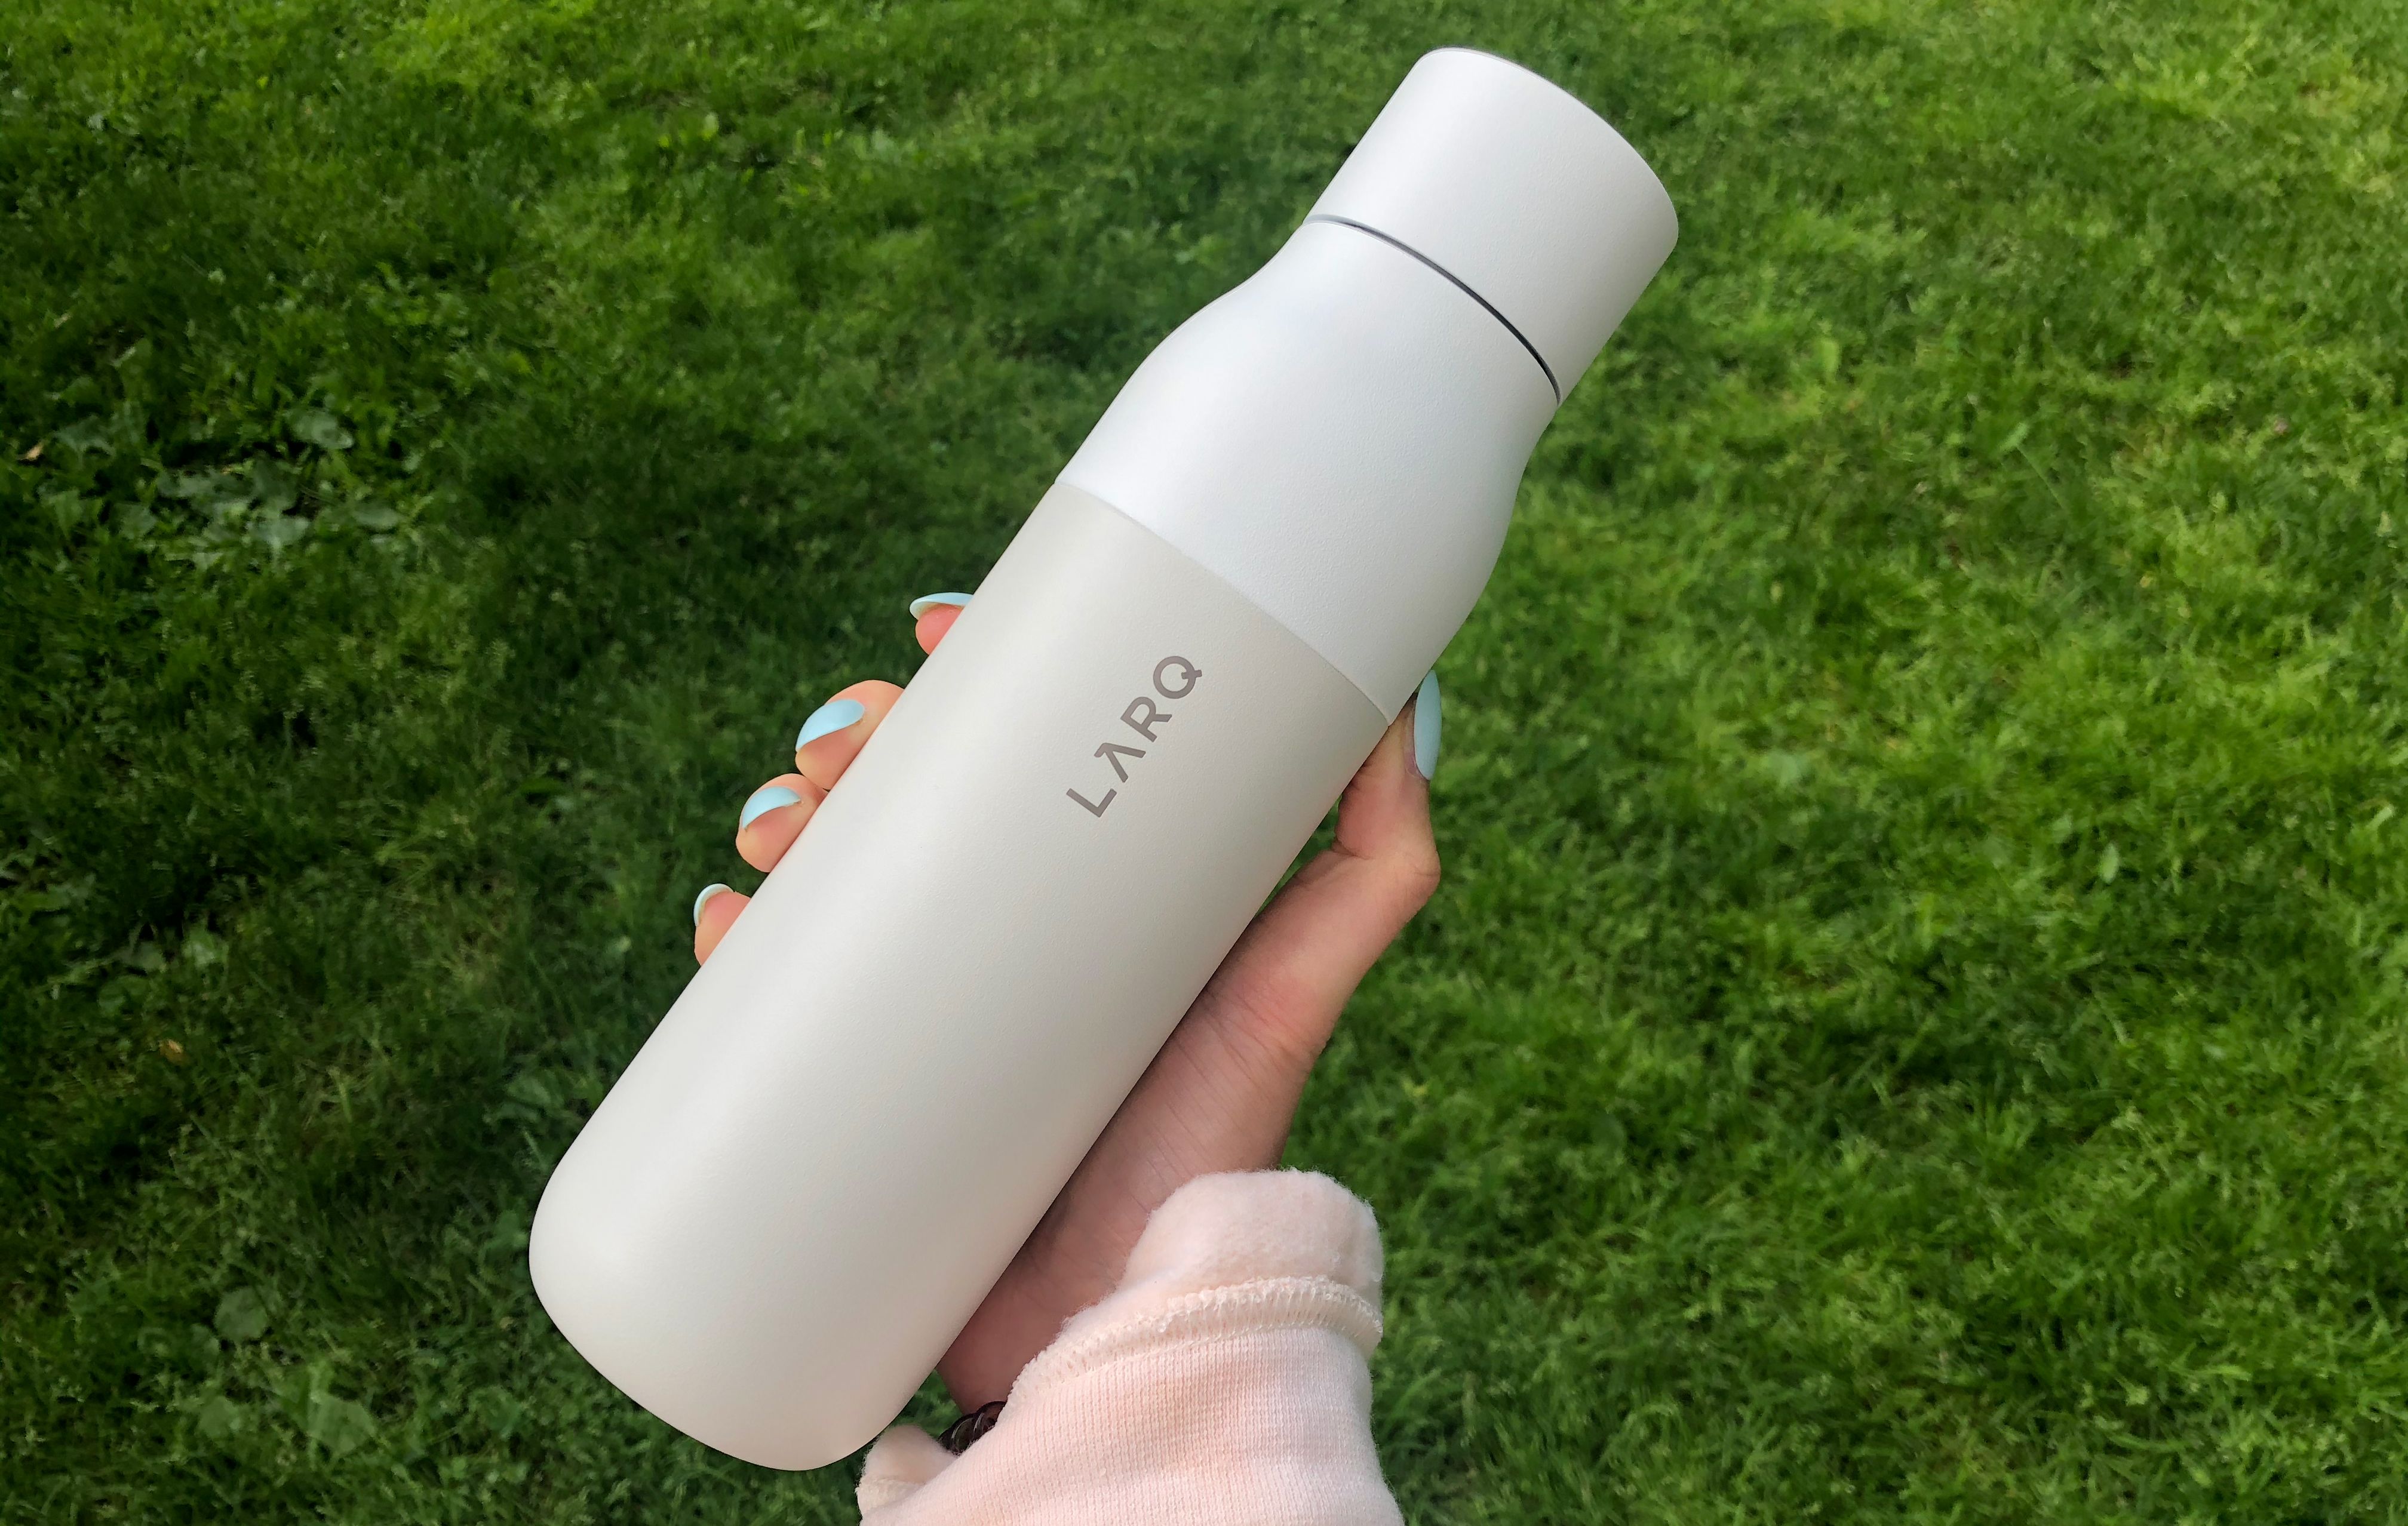 The LARQ PureVis water bottle uses a UV-C LED technology that